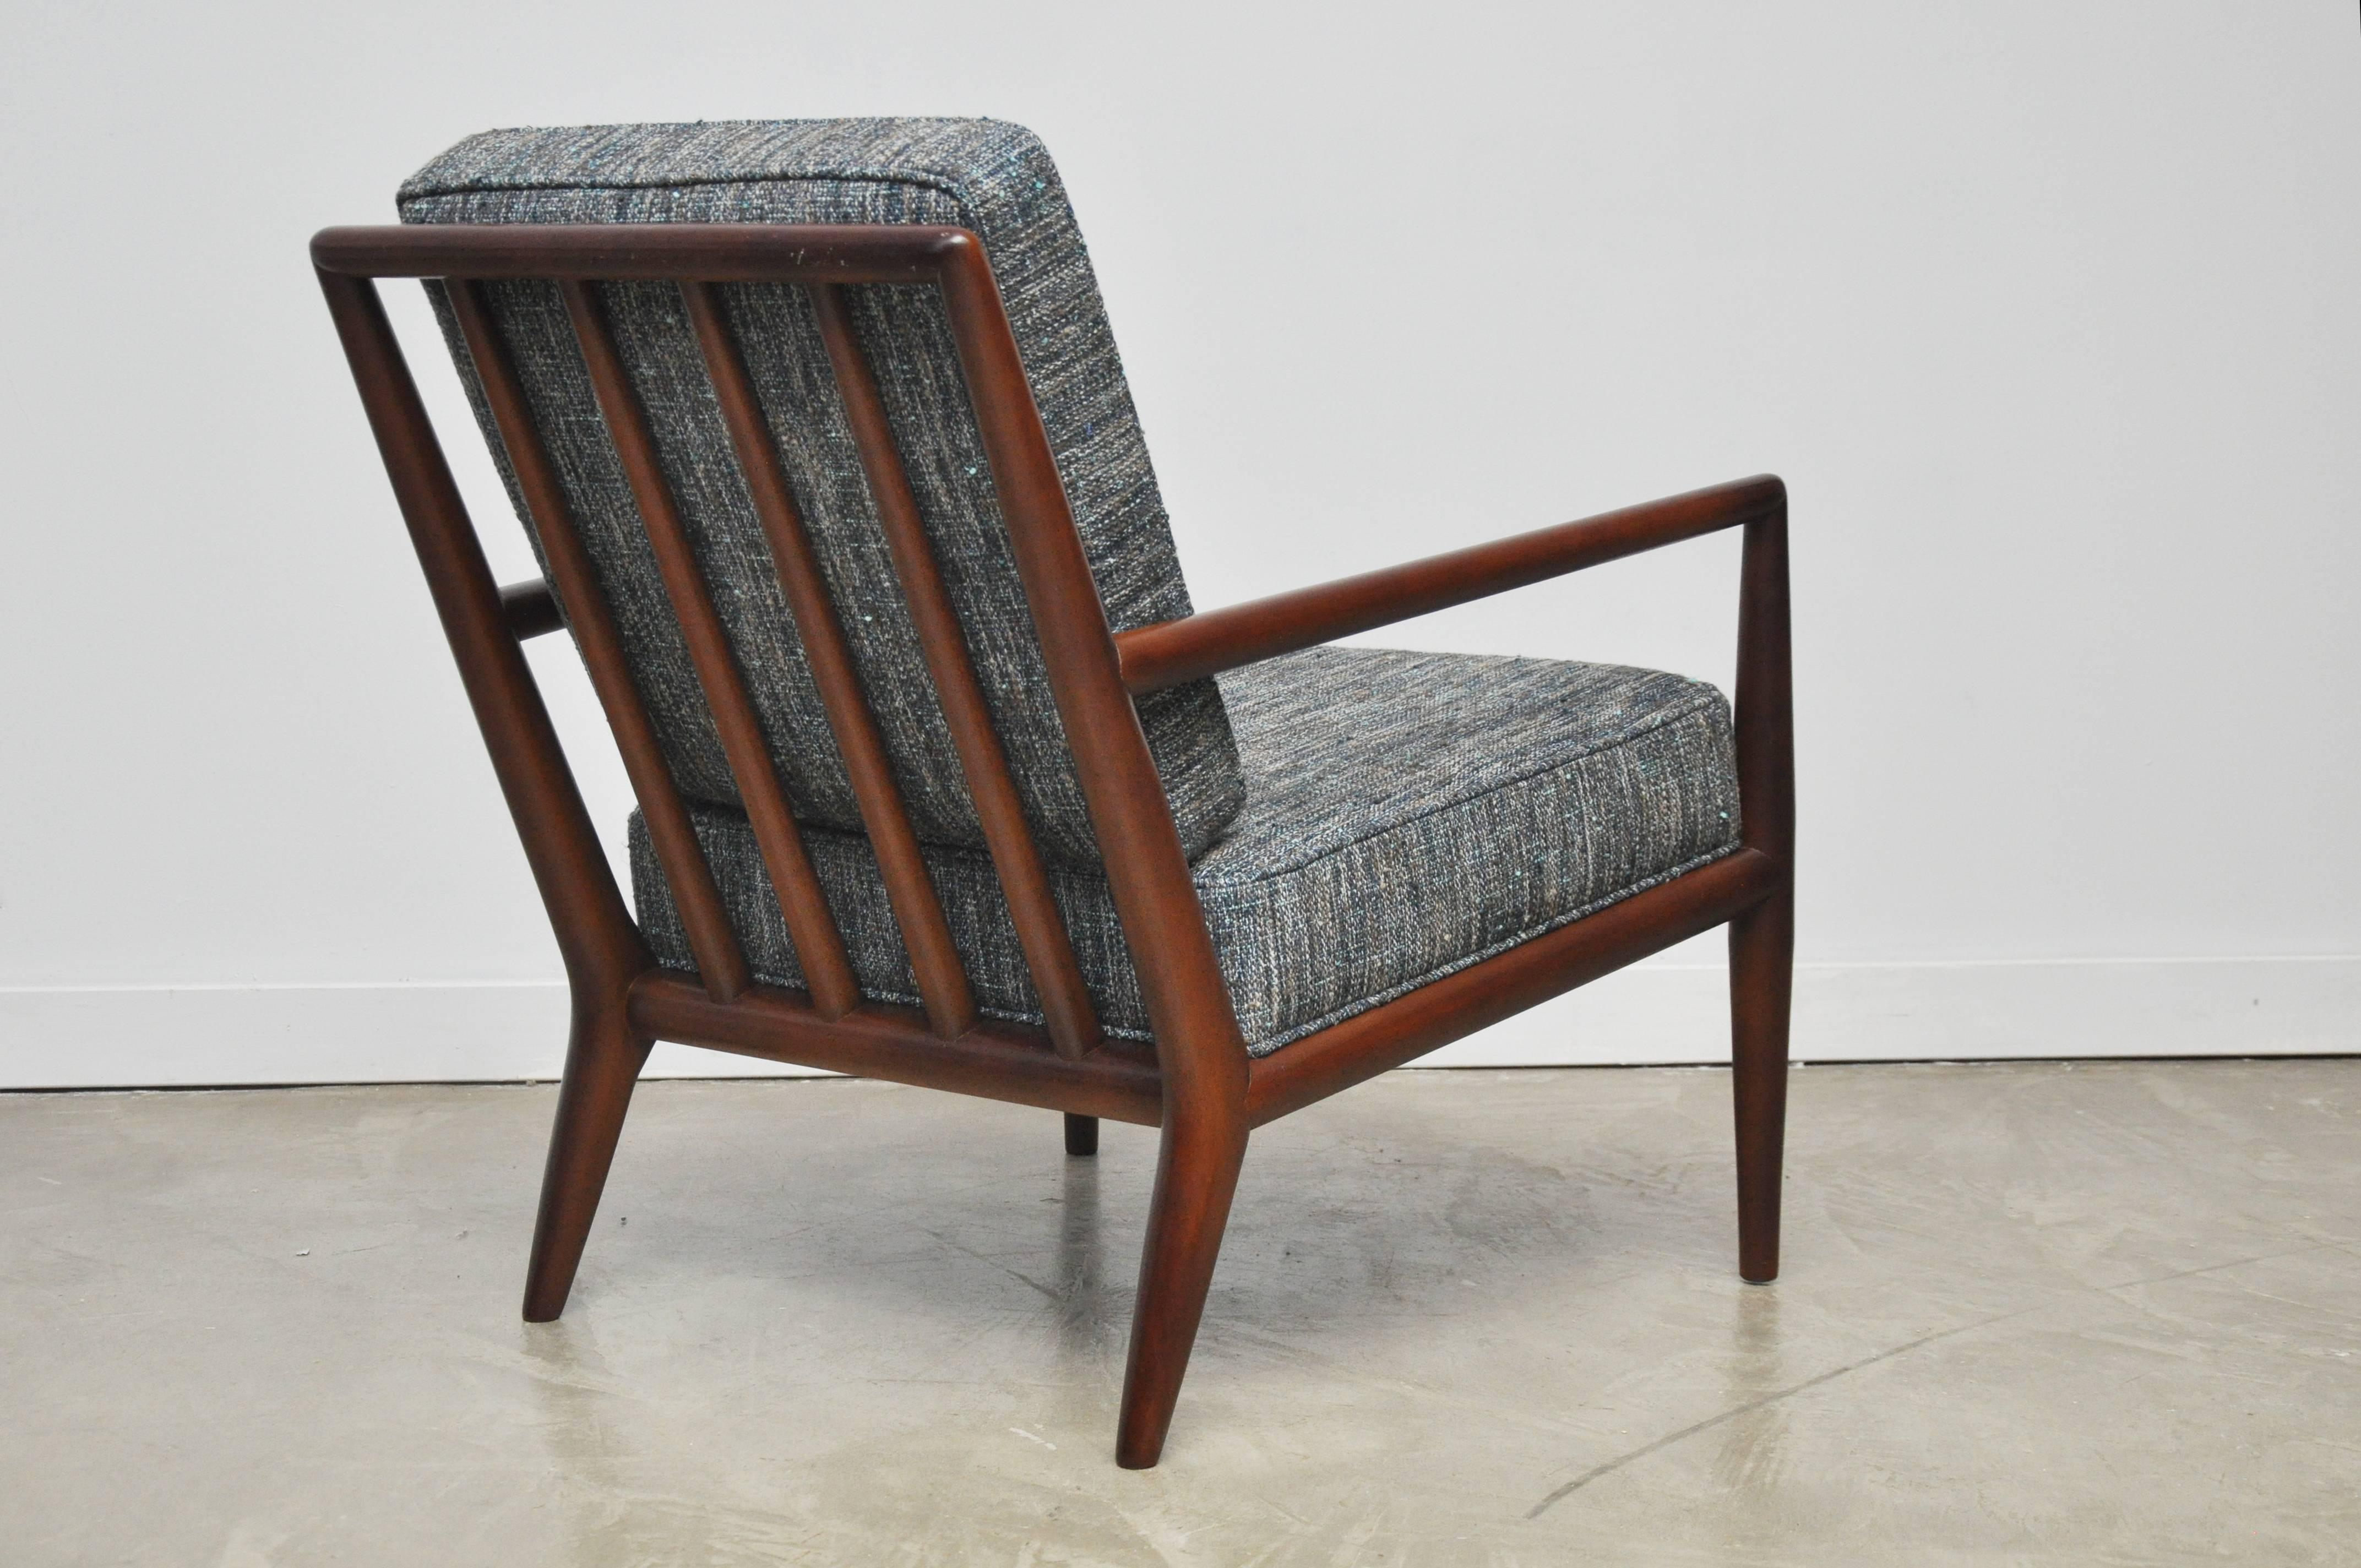 Pair of lounge chairs by T.H. Robs John-Gibbings. Fully restored walnut frames with new blue woven upholstery cushions.